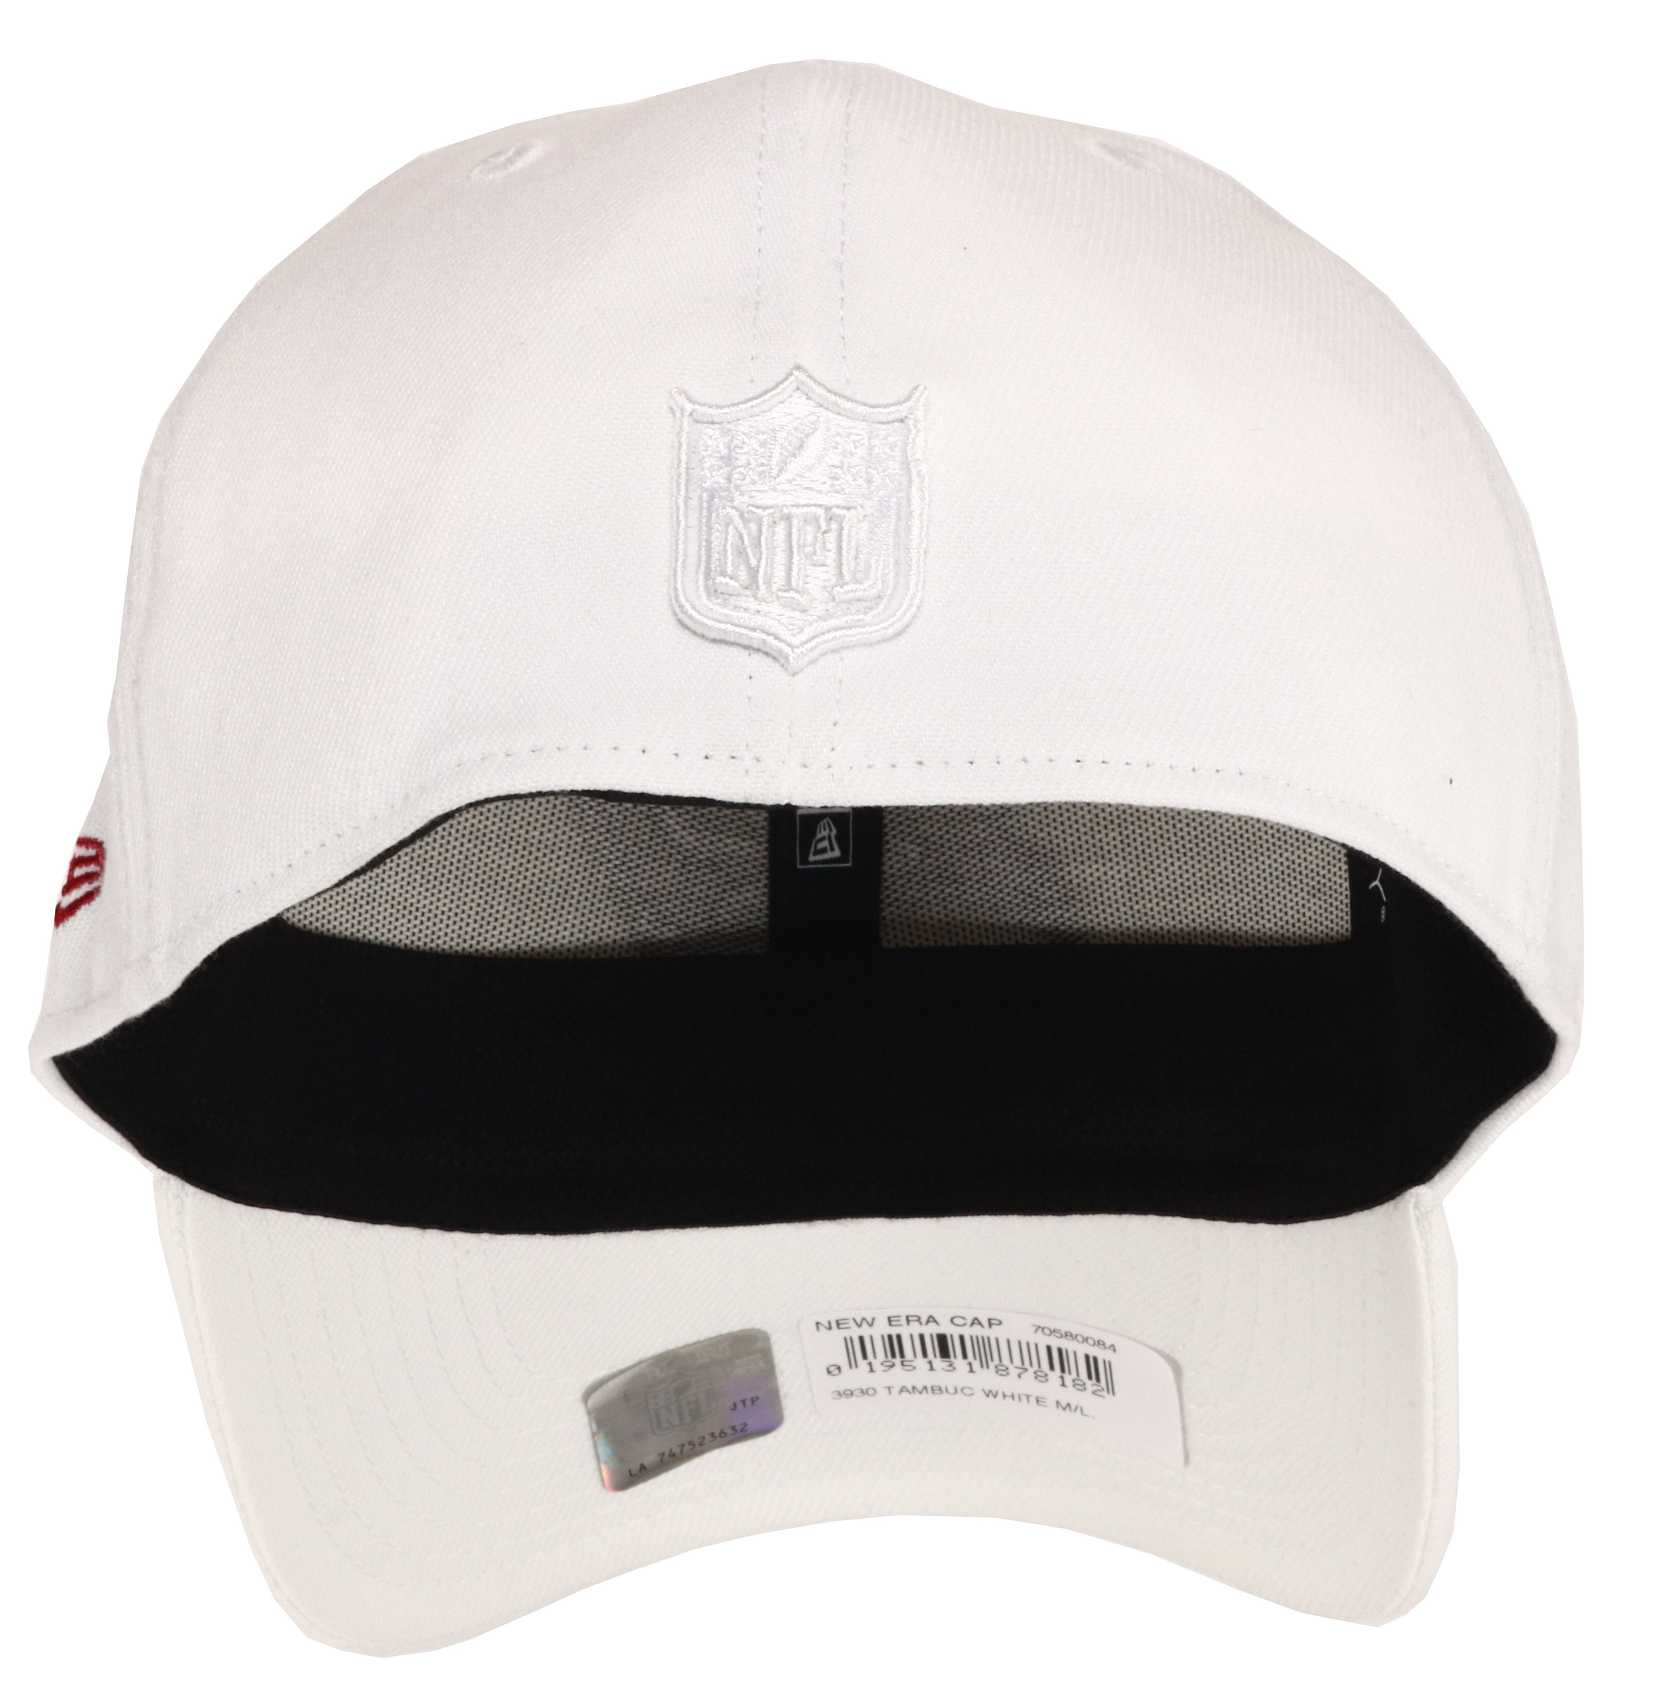 Tampa Bay Buccaneers NFL Core Edition White 39Thirty Stretch Cap New Era